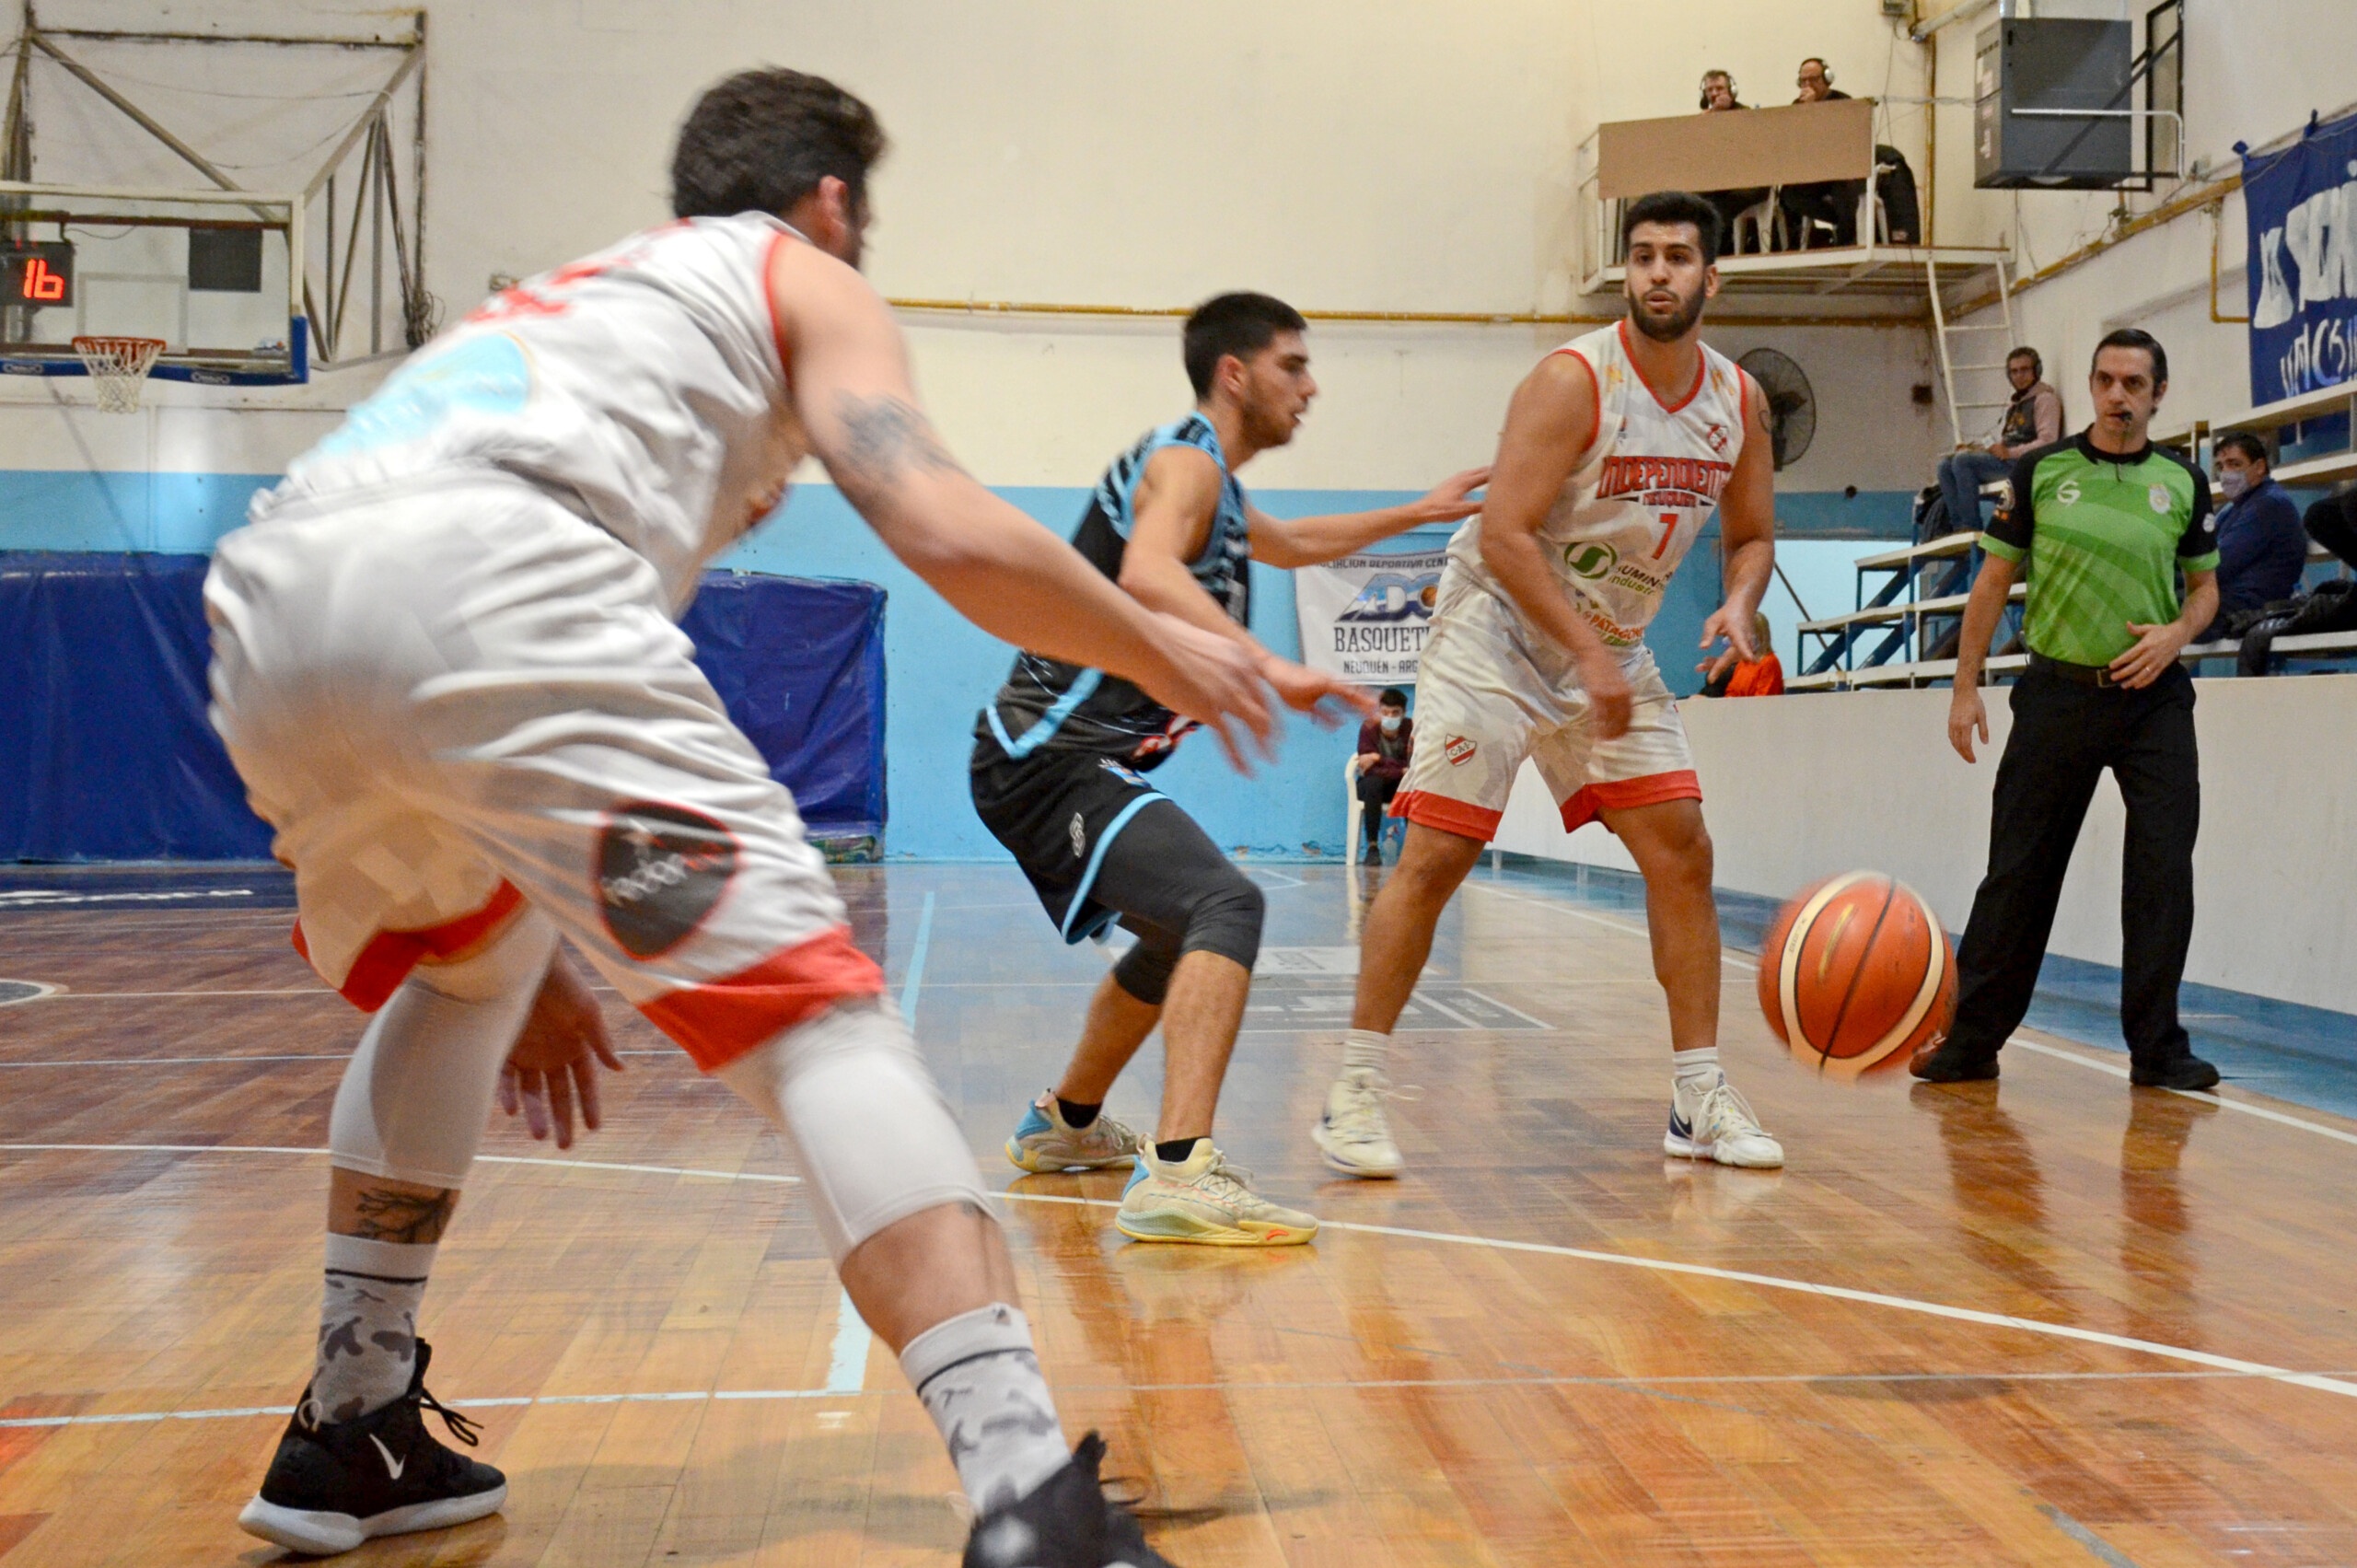 Federal basketball: Independiente prevailed with authority in Centenario